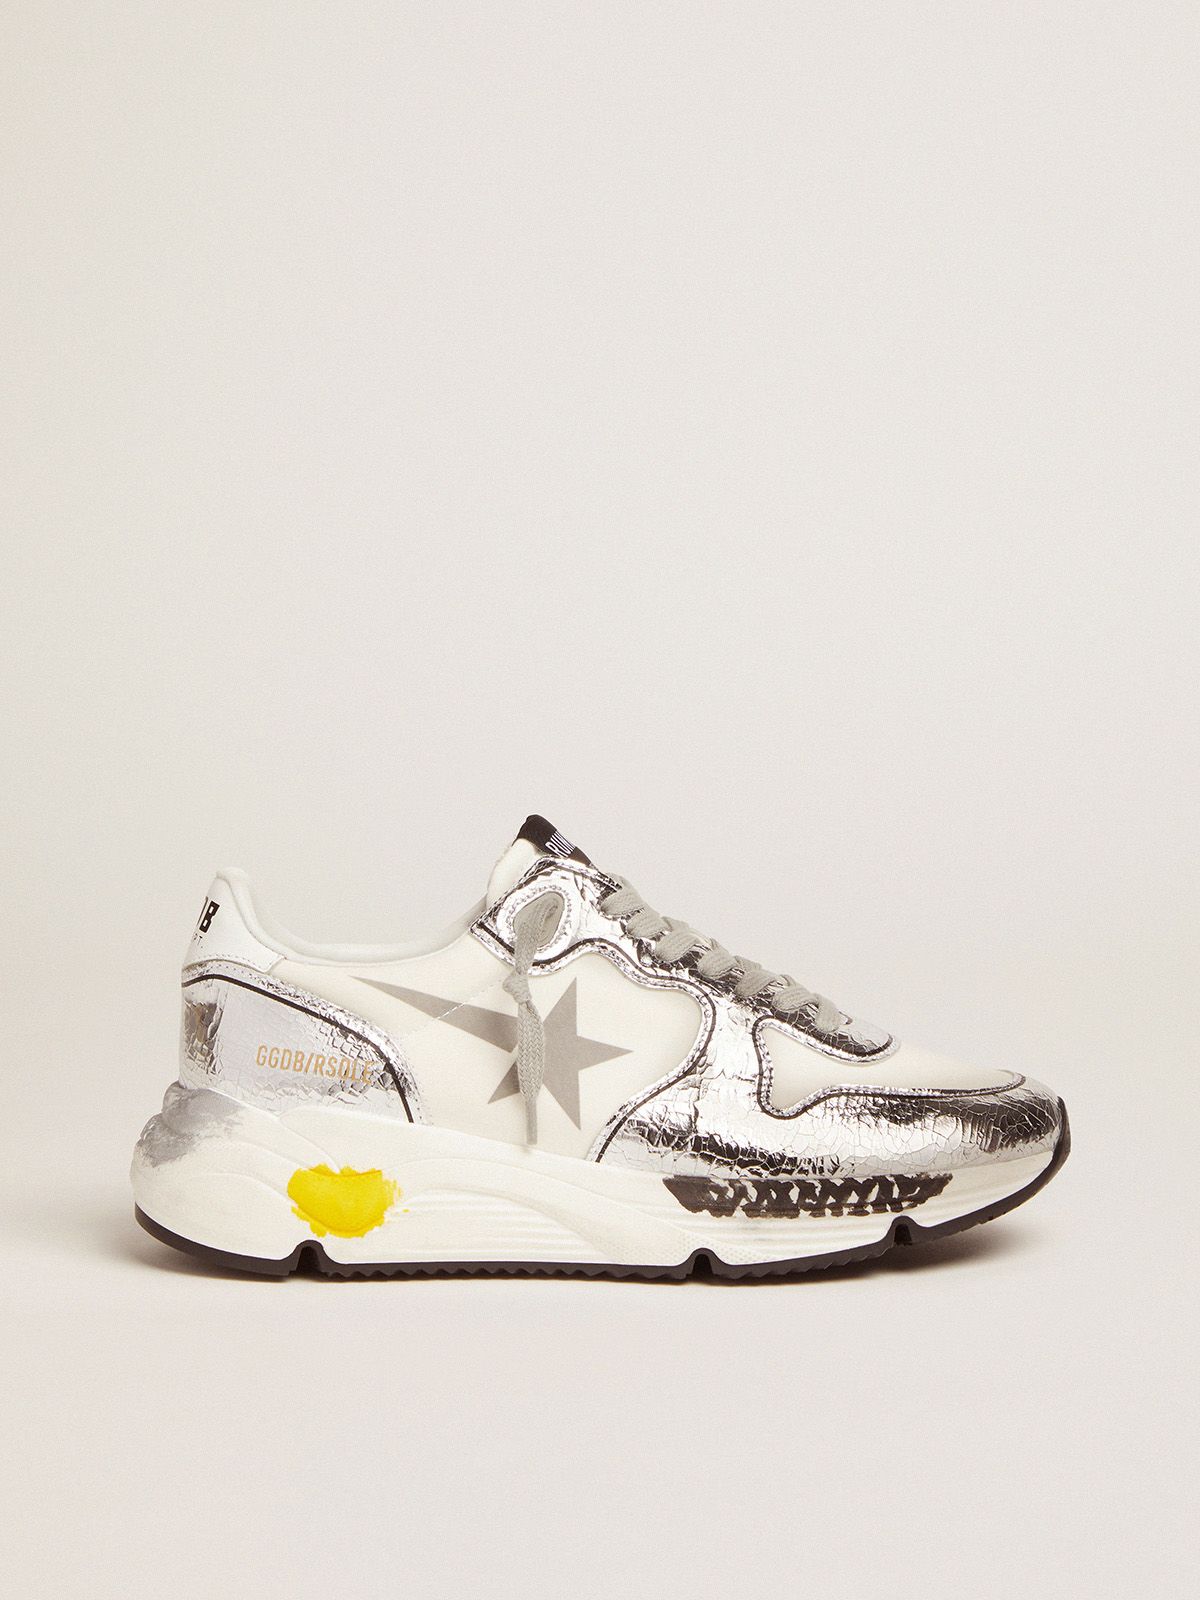 golden goose and Running Silver white Sole sneakers